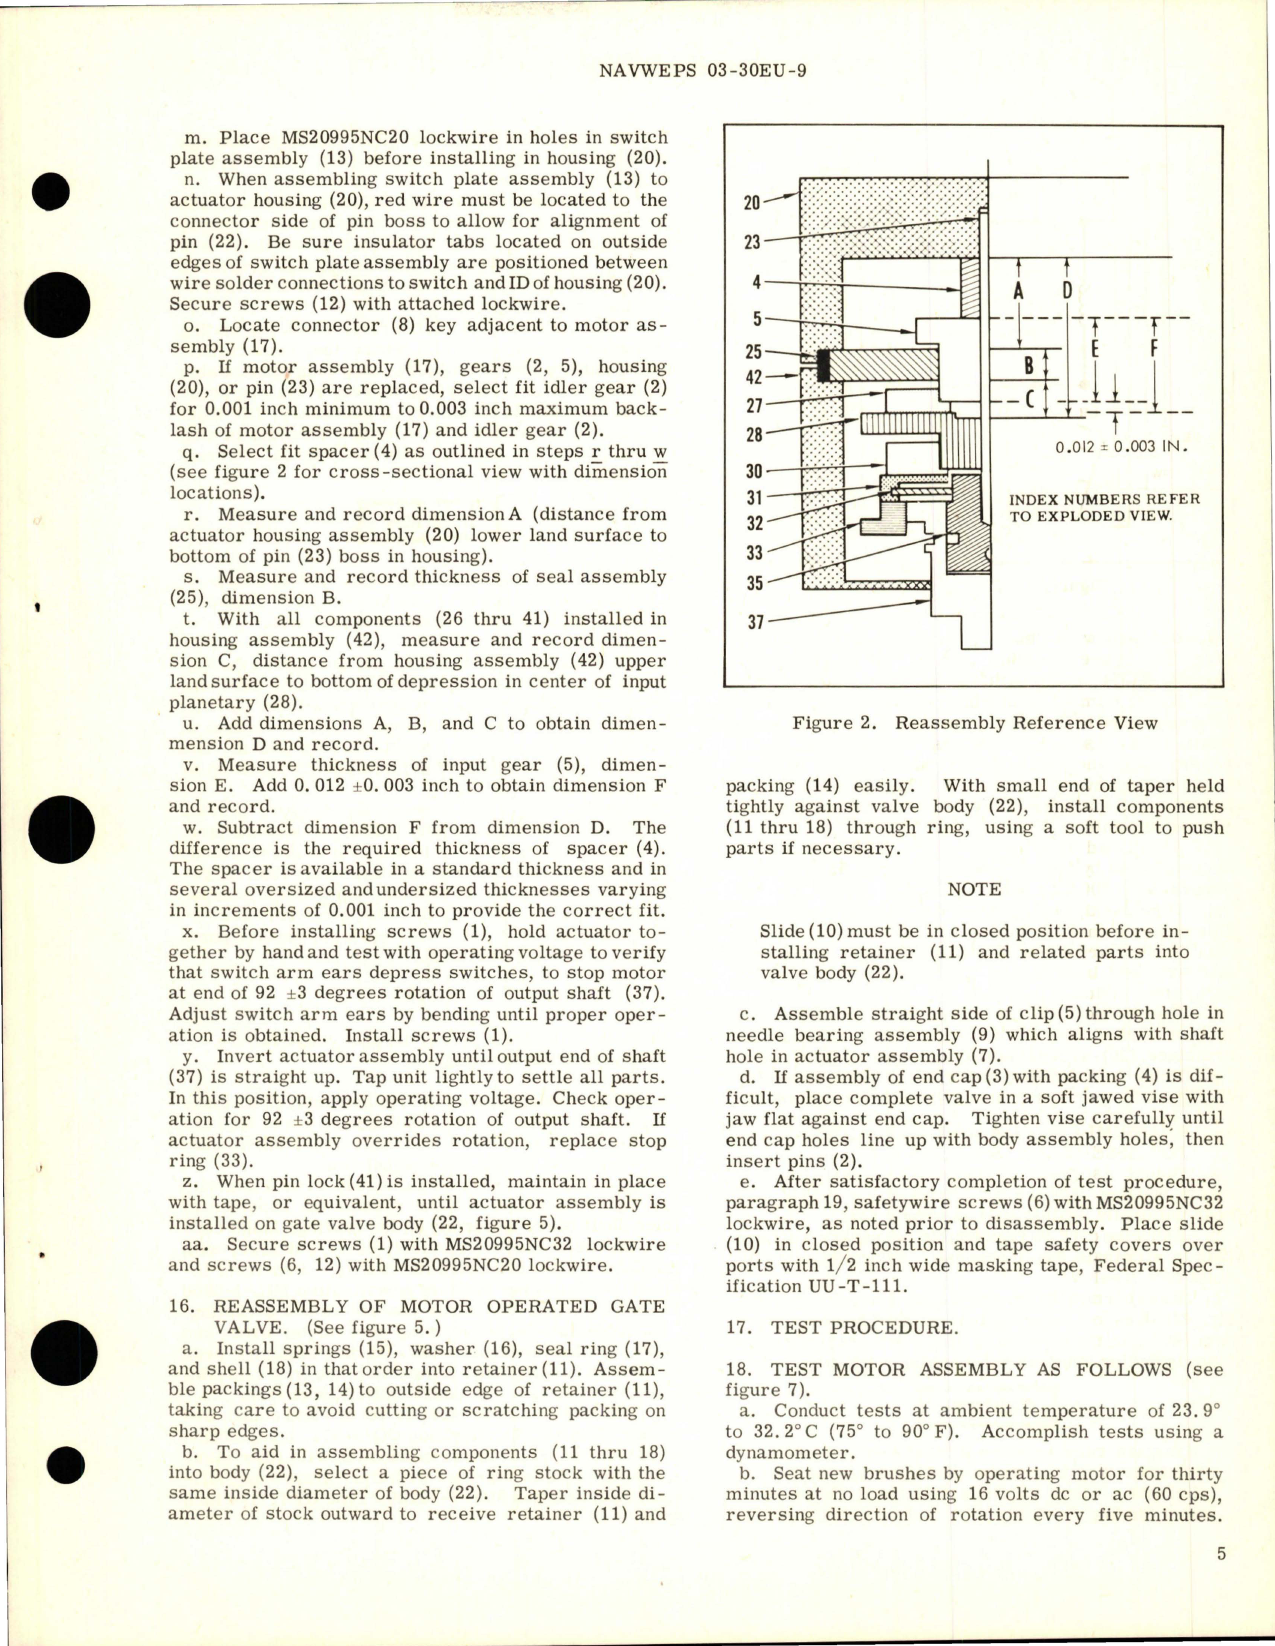 Sample page 7 from AirCorps Library document: Overhaul Instructions with Parts Breakdown for Motor Operated Gate Valve - Part AV16B1446C